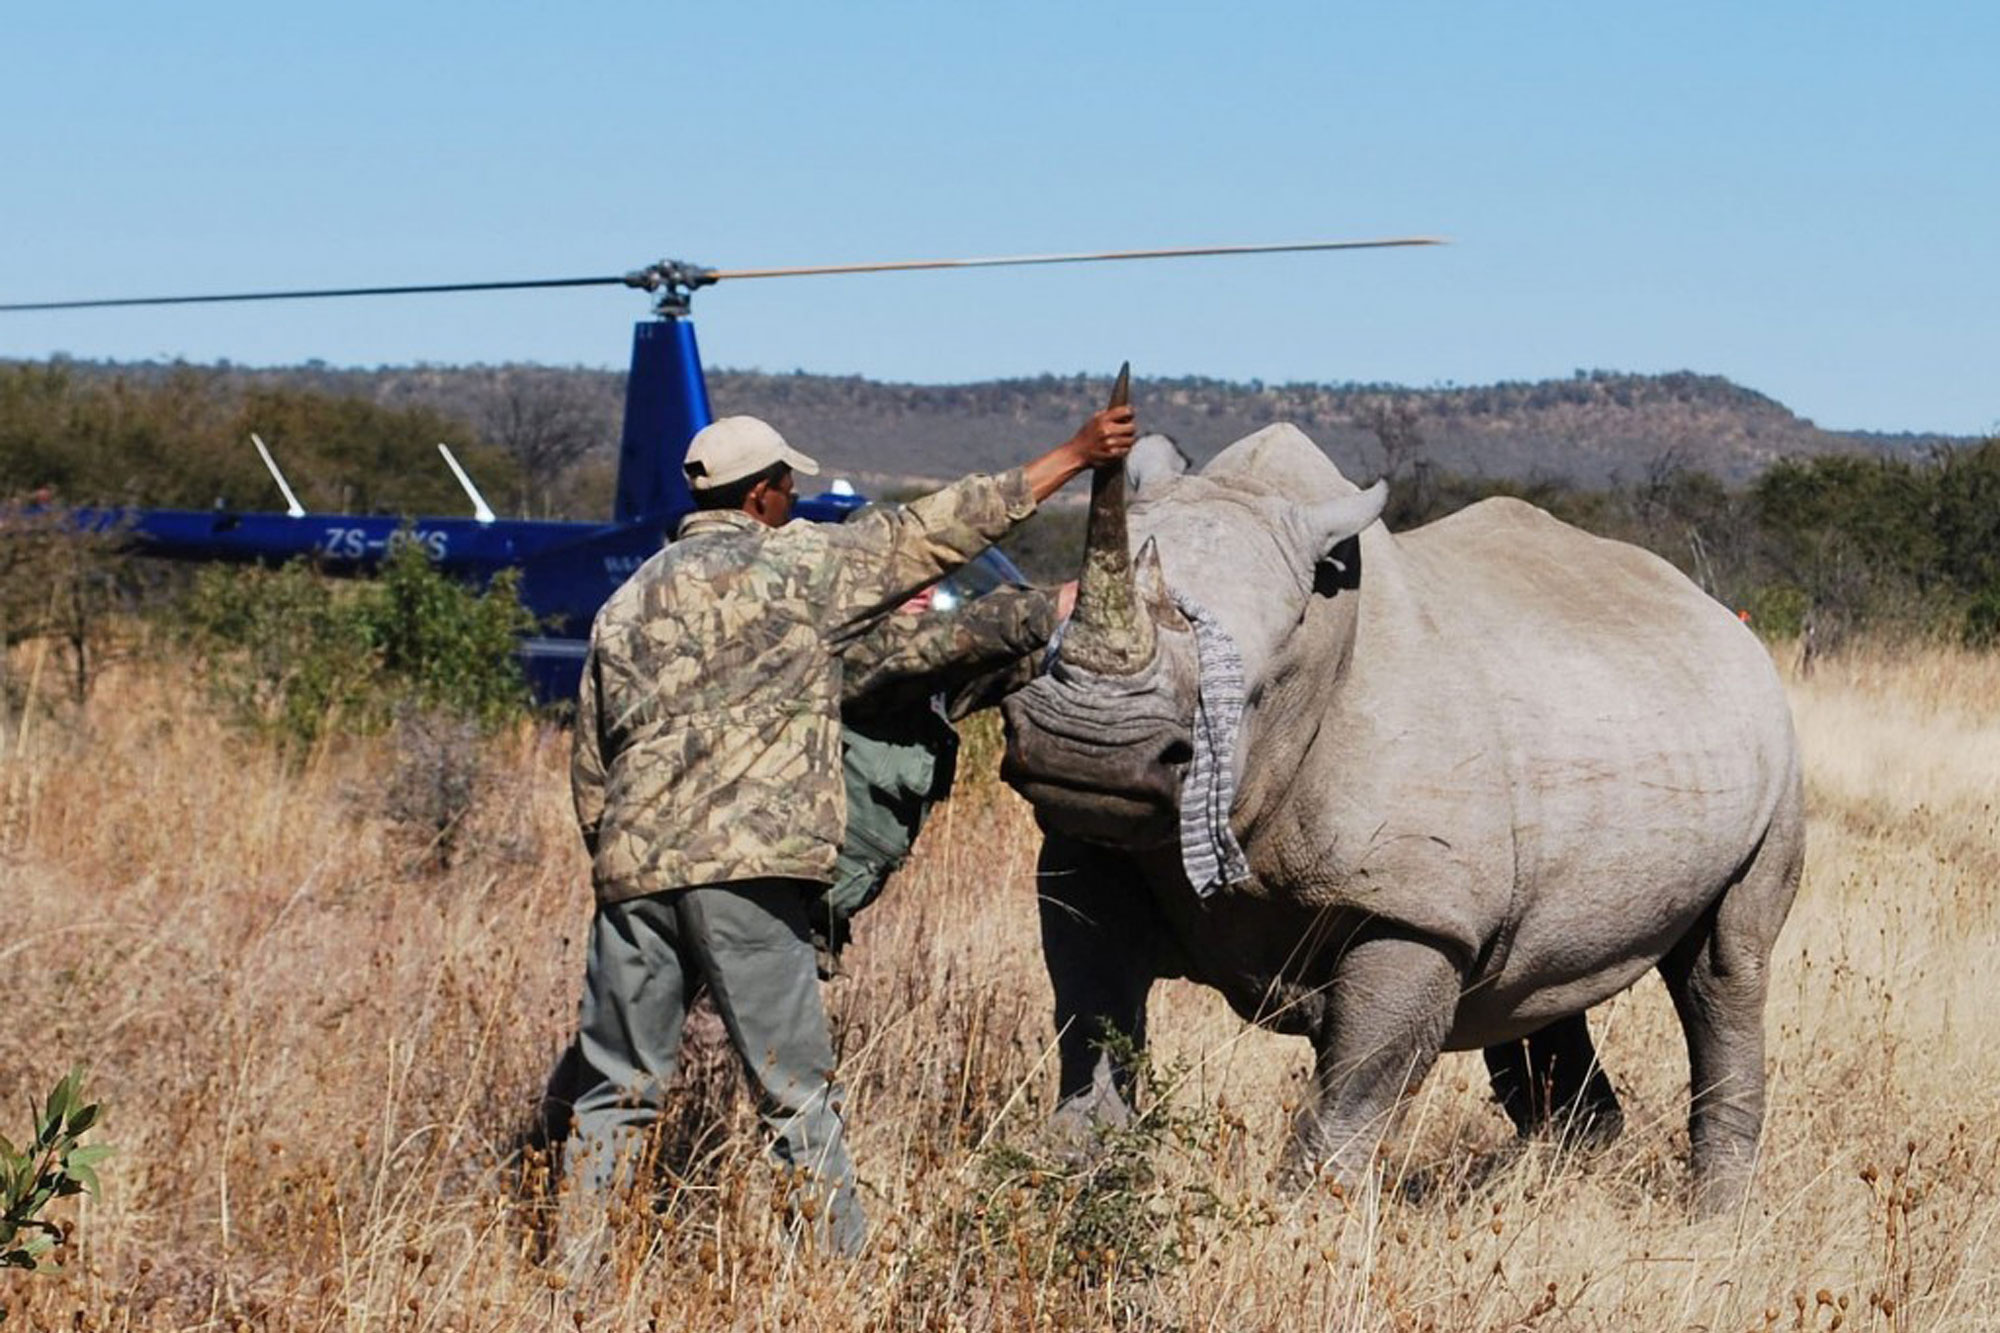 Rhino horn being poached